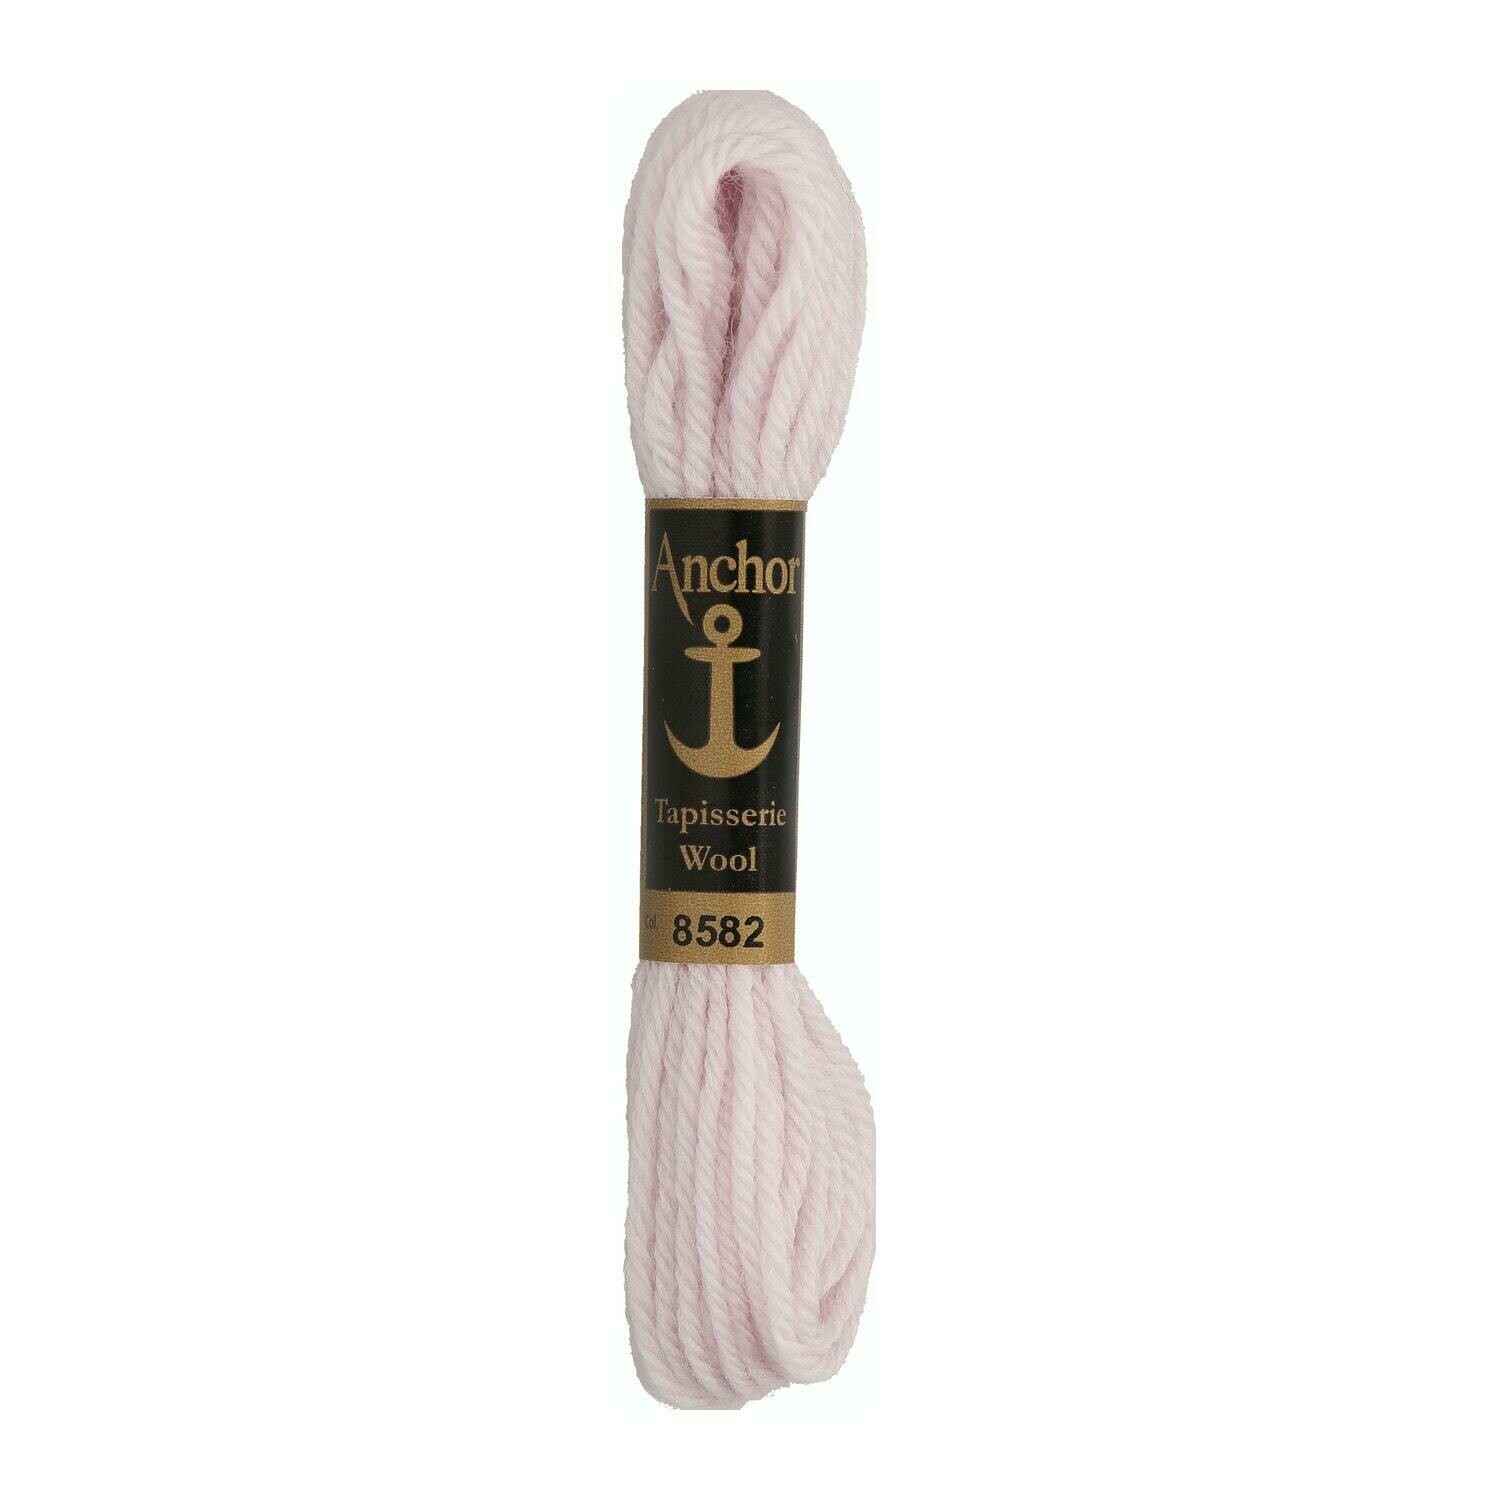 Anchor Tapisserie Wool #08582